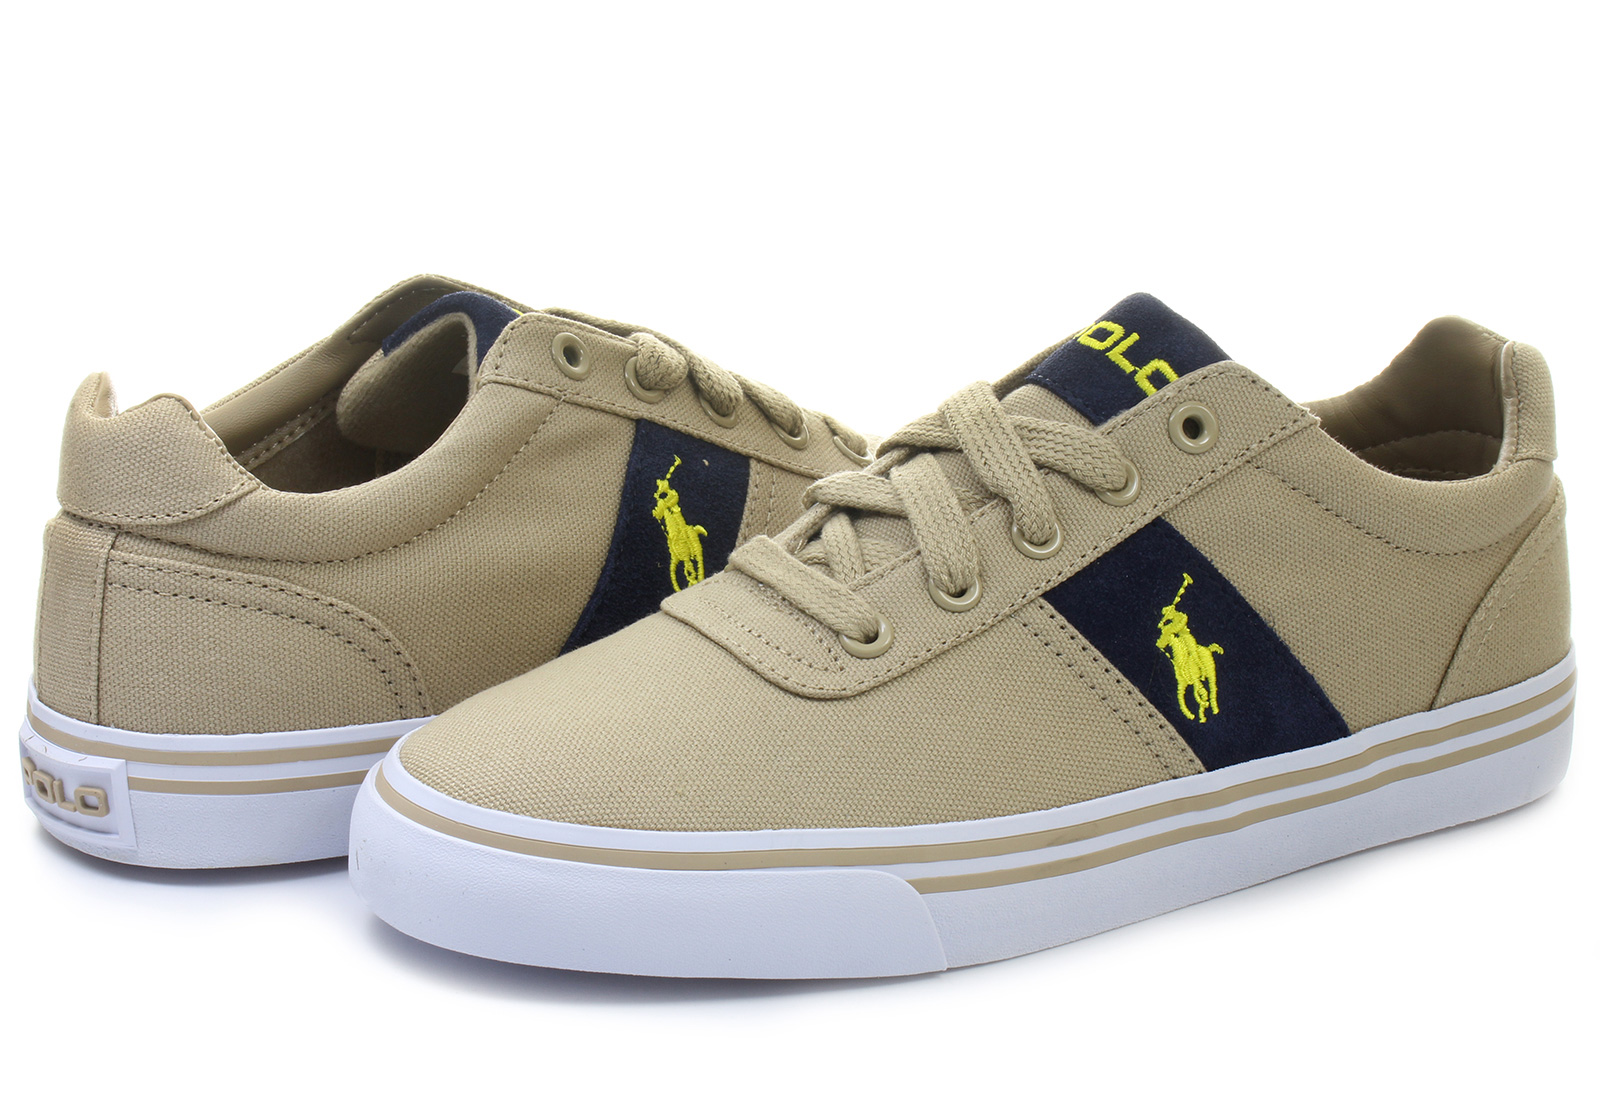 Polo Ralph Lauren Shoes - Hanford - 221-b-W3IOF - Online shop for ...